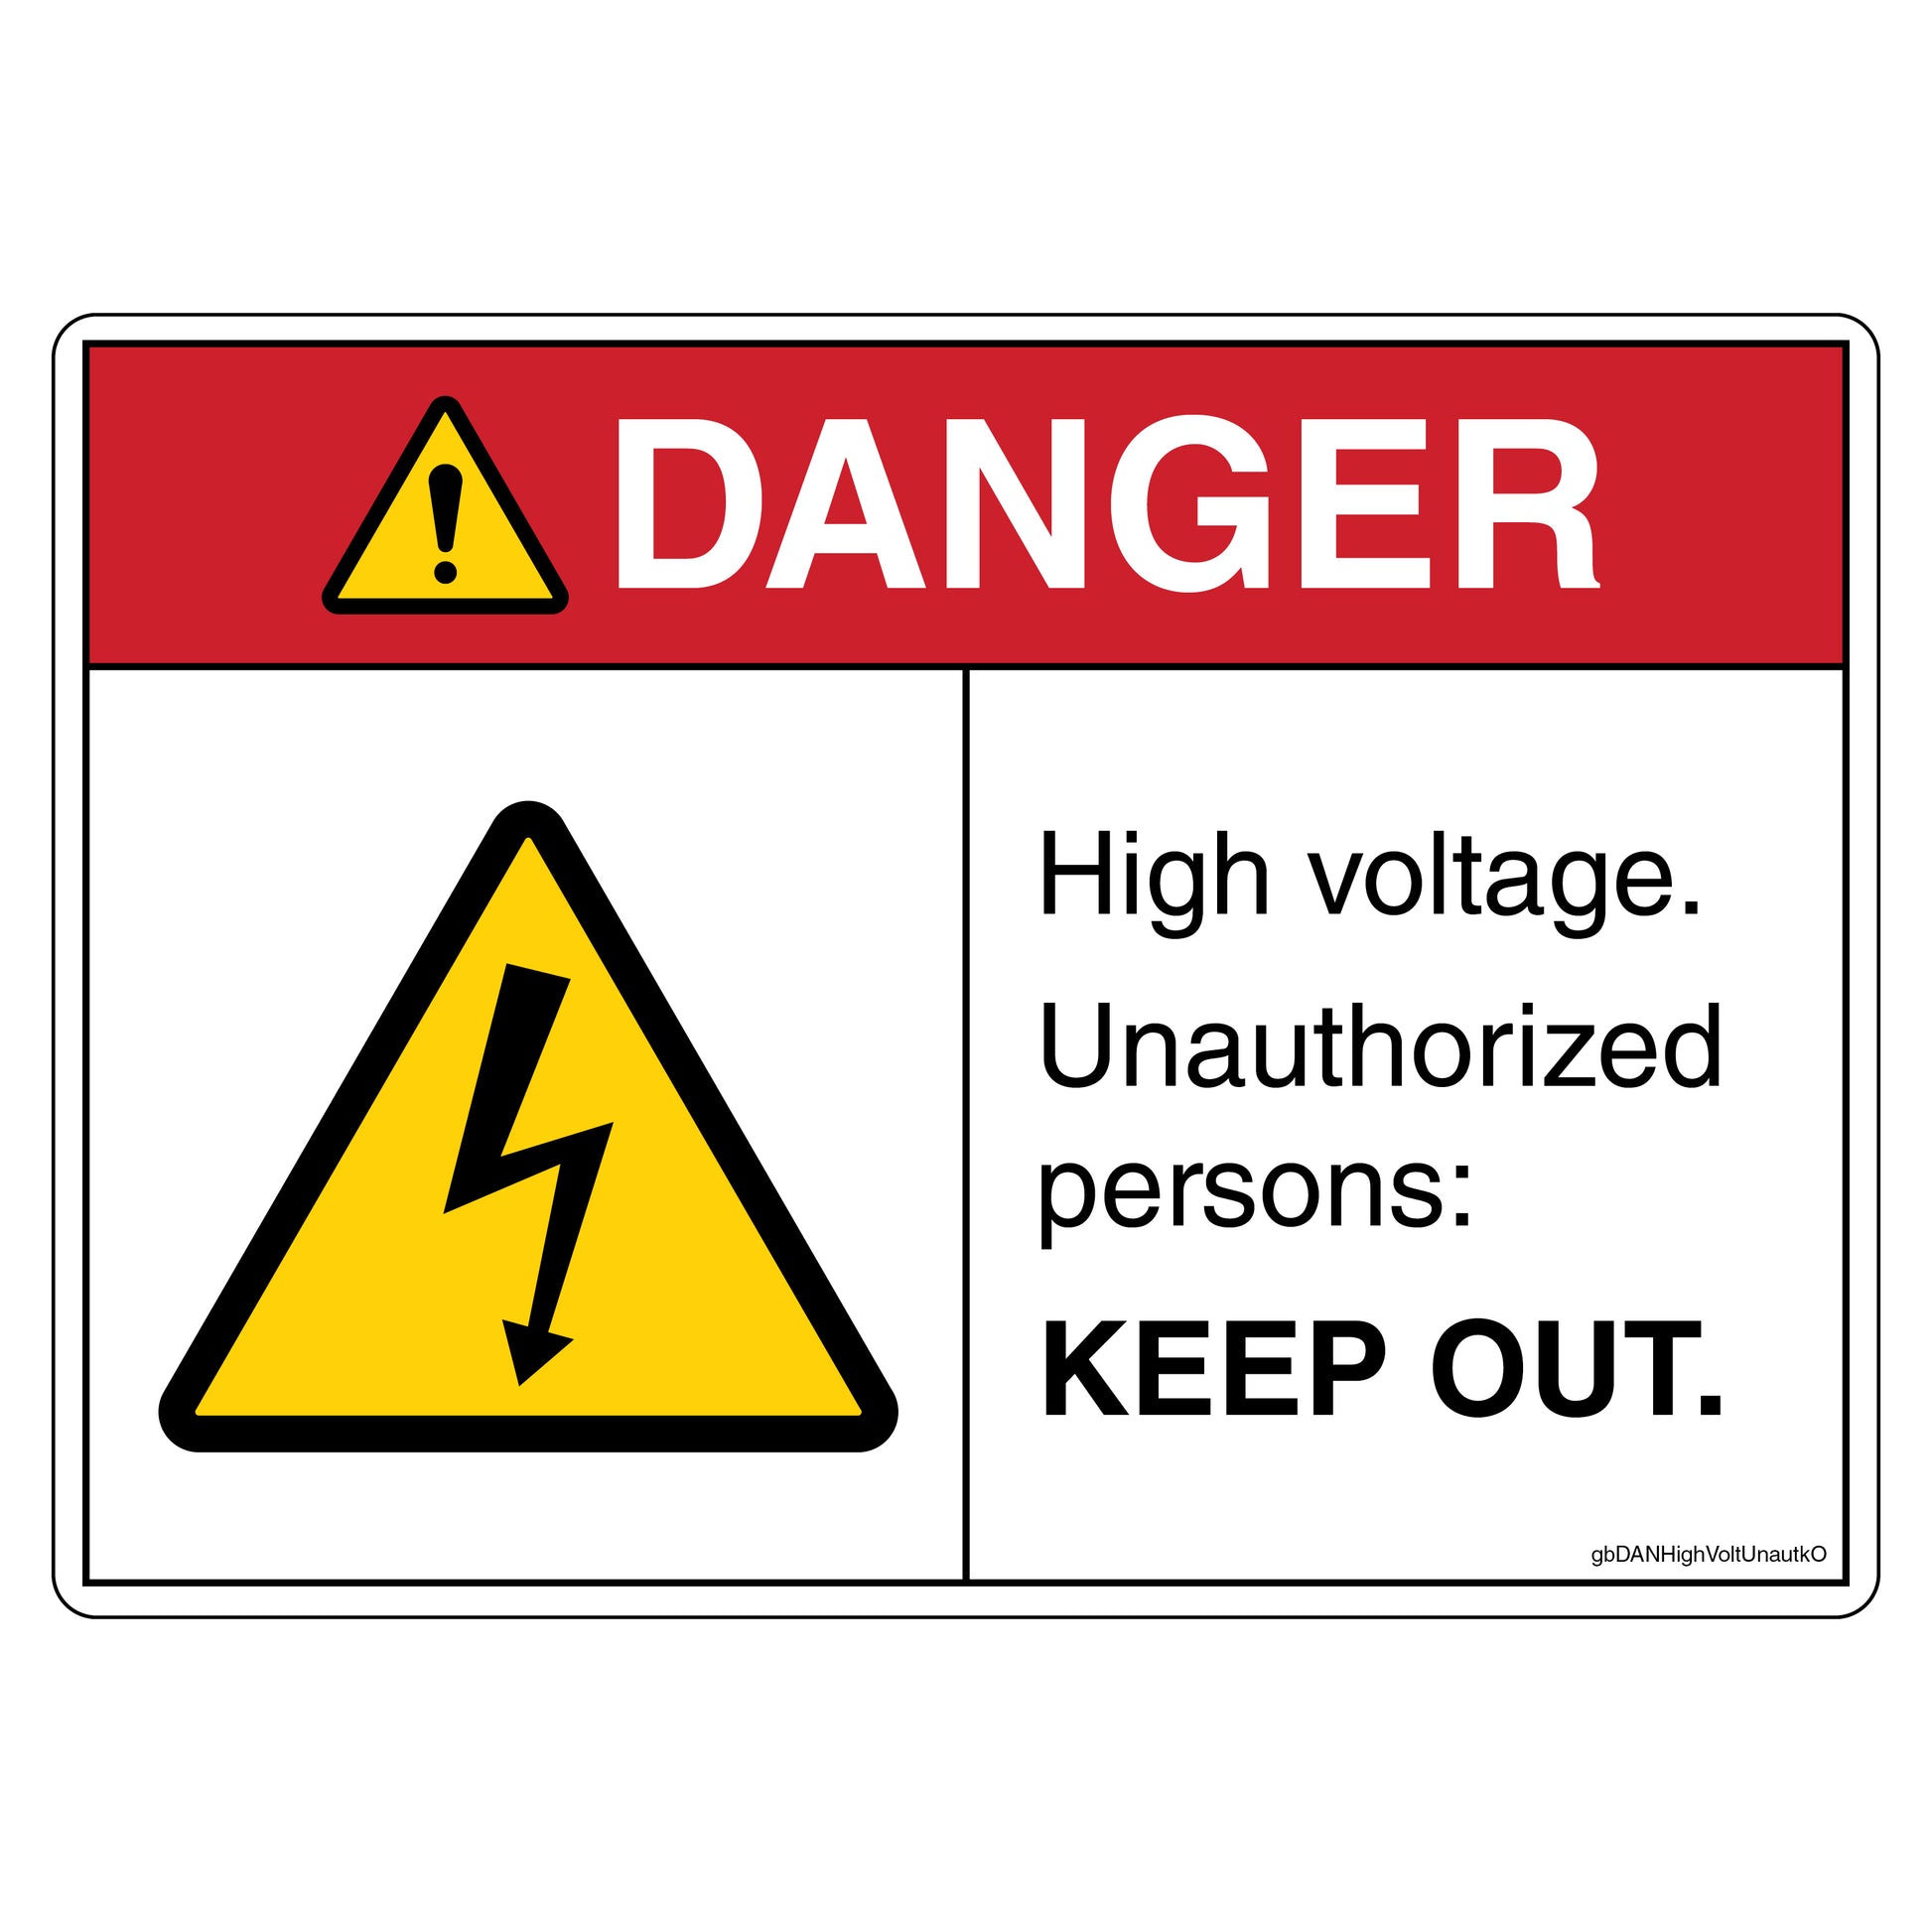 Danger High Voltage Unauthorized Persons Keep Out Decal.